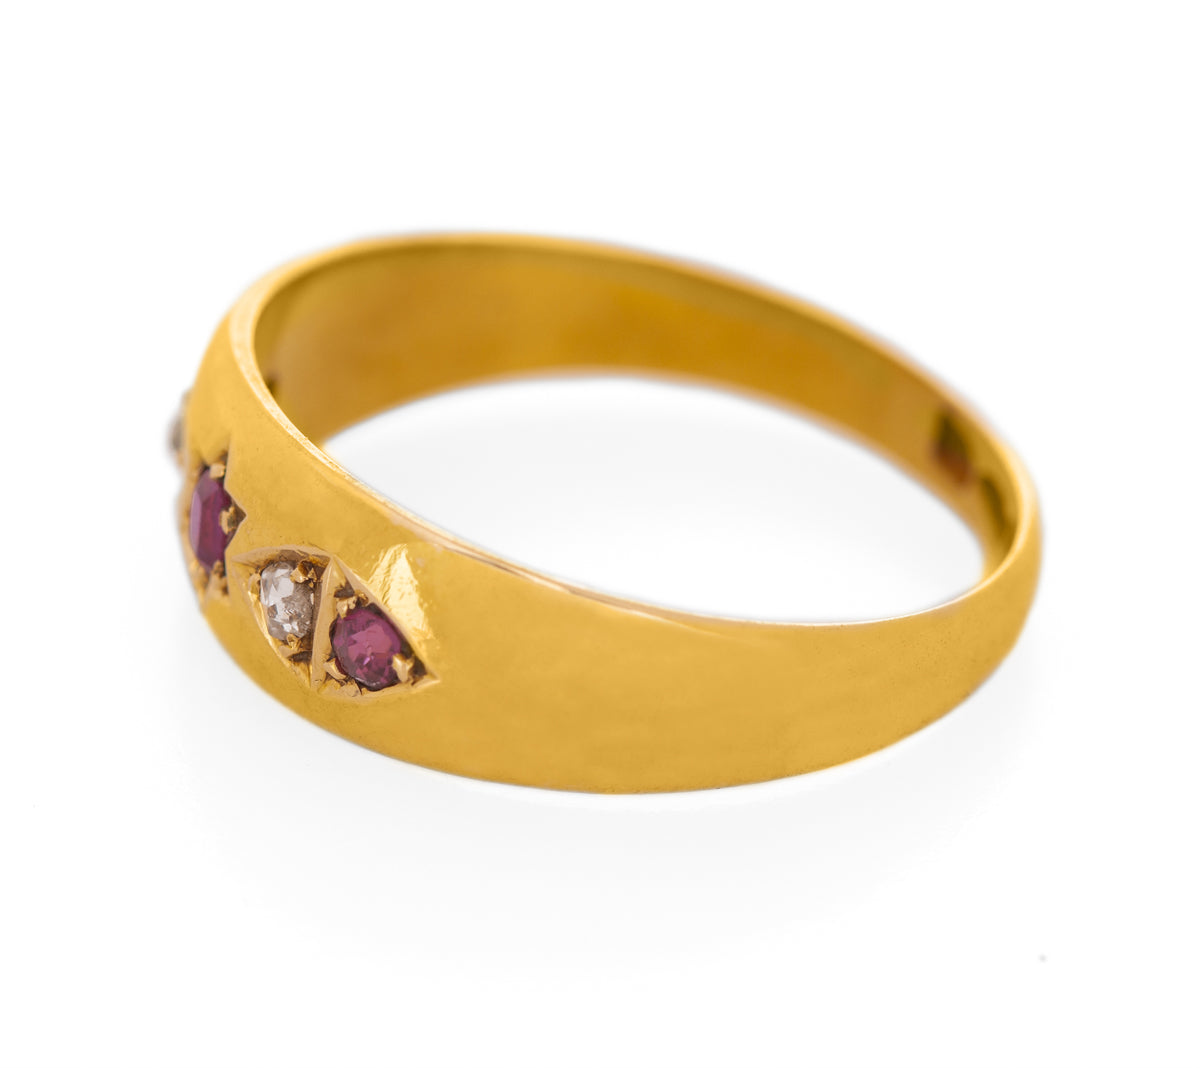 Antique Victorian 18ct Gold Ruby & Diamond Gypsy Set Ring Chester 1893 UK Size M (Code A1107)